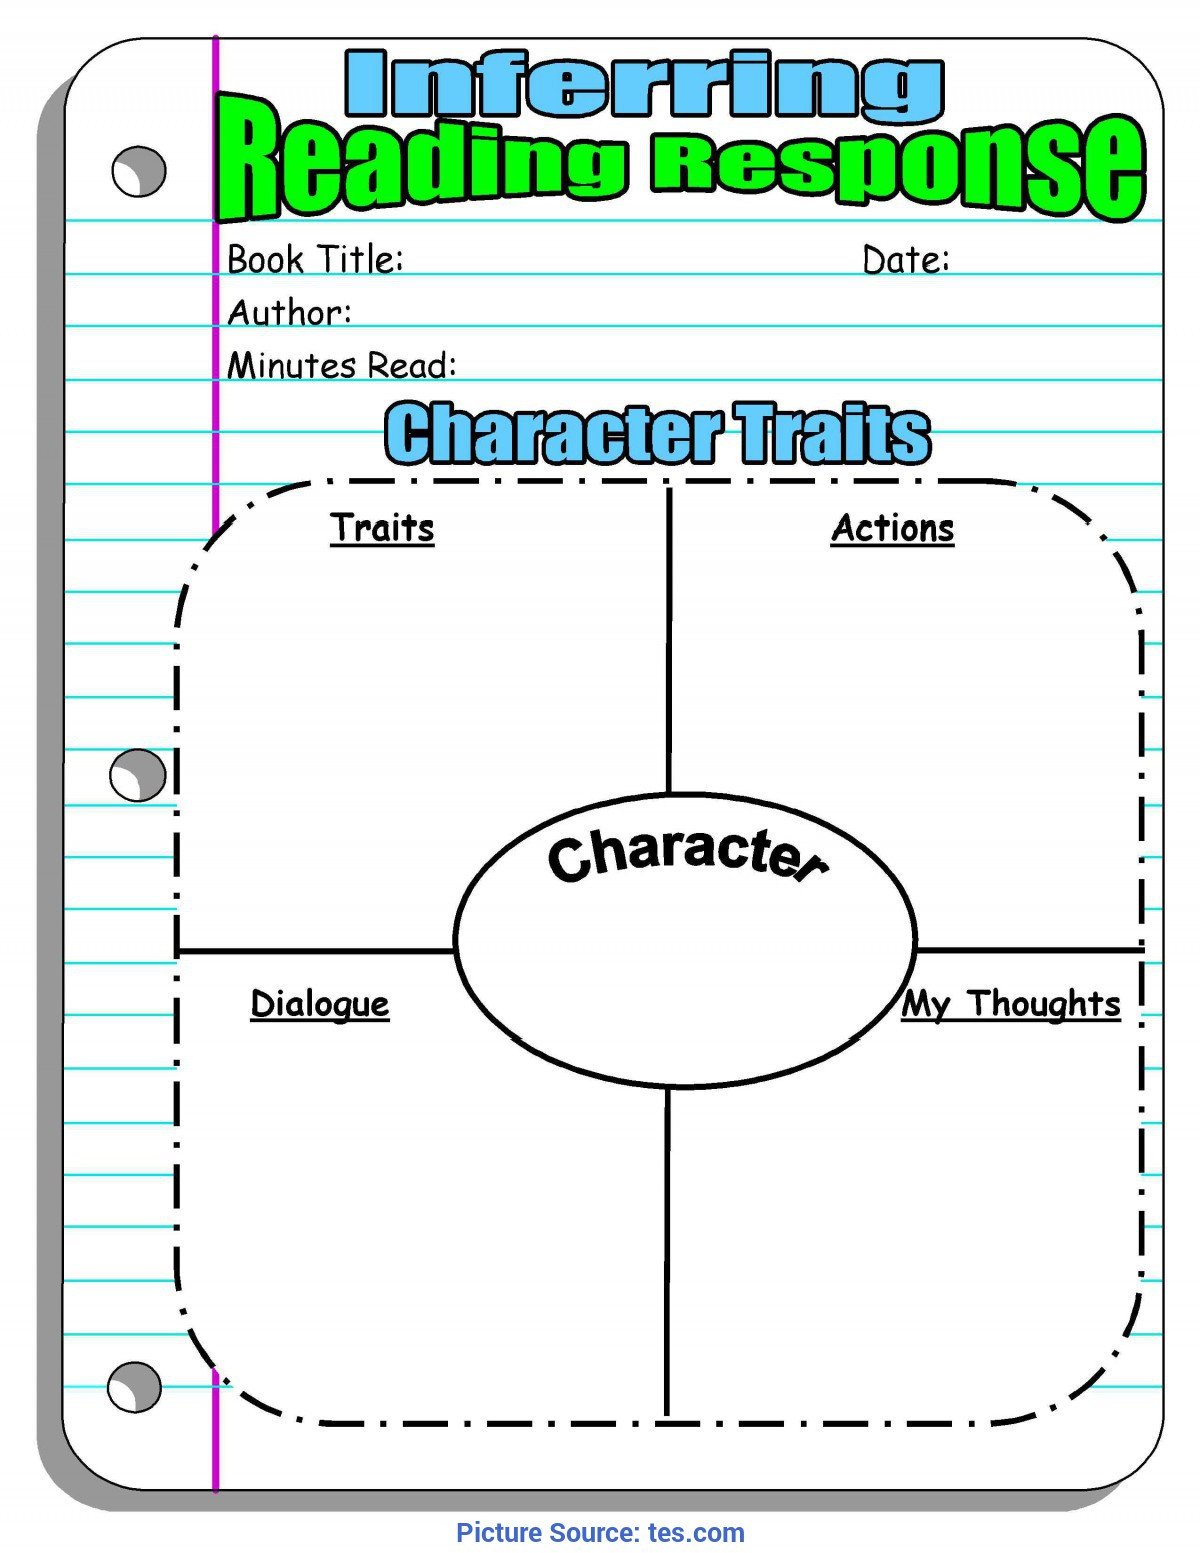 Character Traits Lesson Plans Best Lessons Learned Journal Template Prince2 Lessons